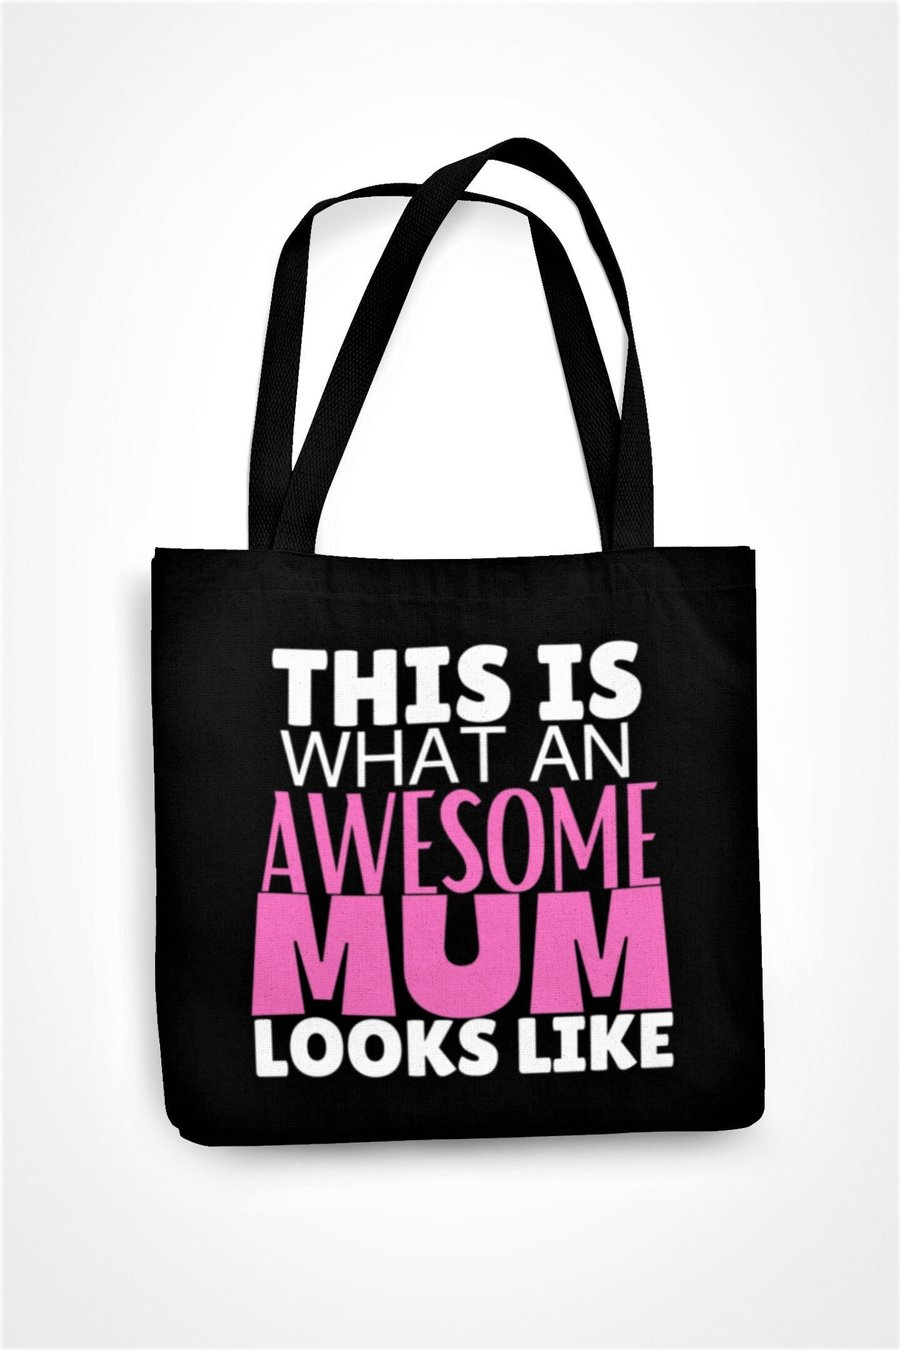 This Is What An Awesome Mum Looks Like Tote Bag Best Mum Shopper Canvas Shopping